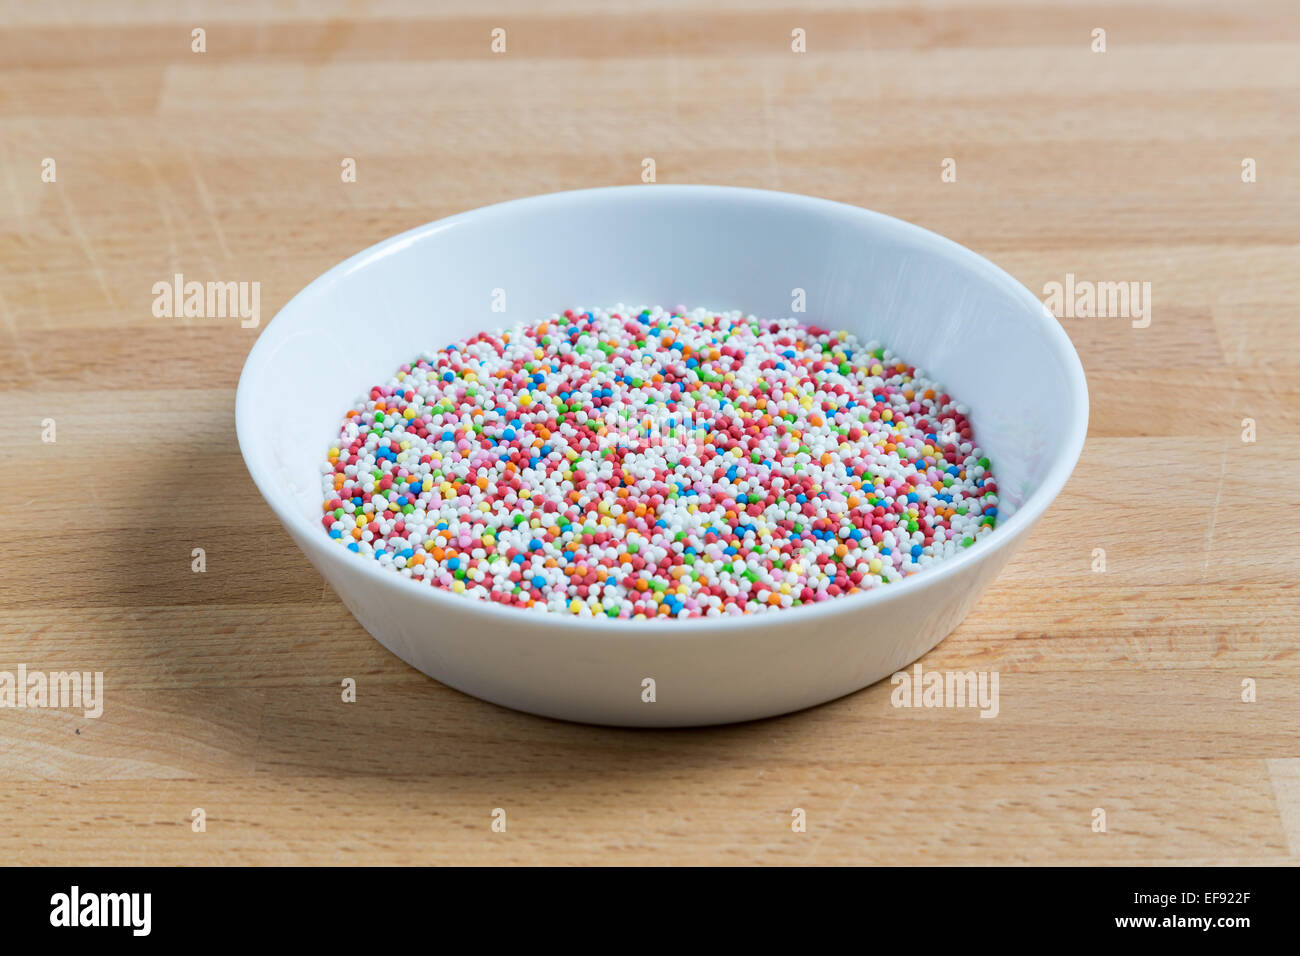 Love beads in a bowl on wood. Stock Photo